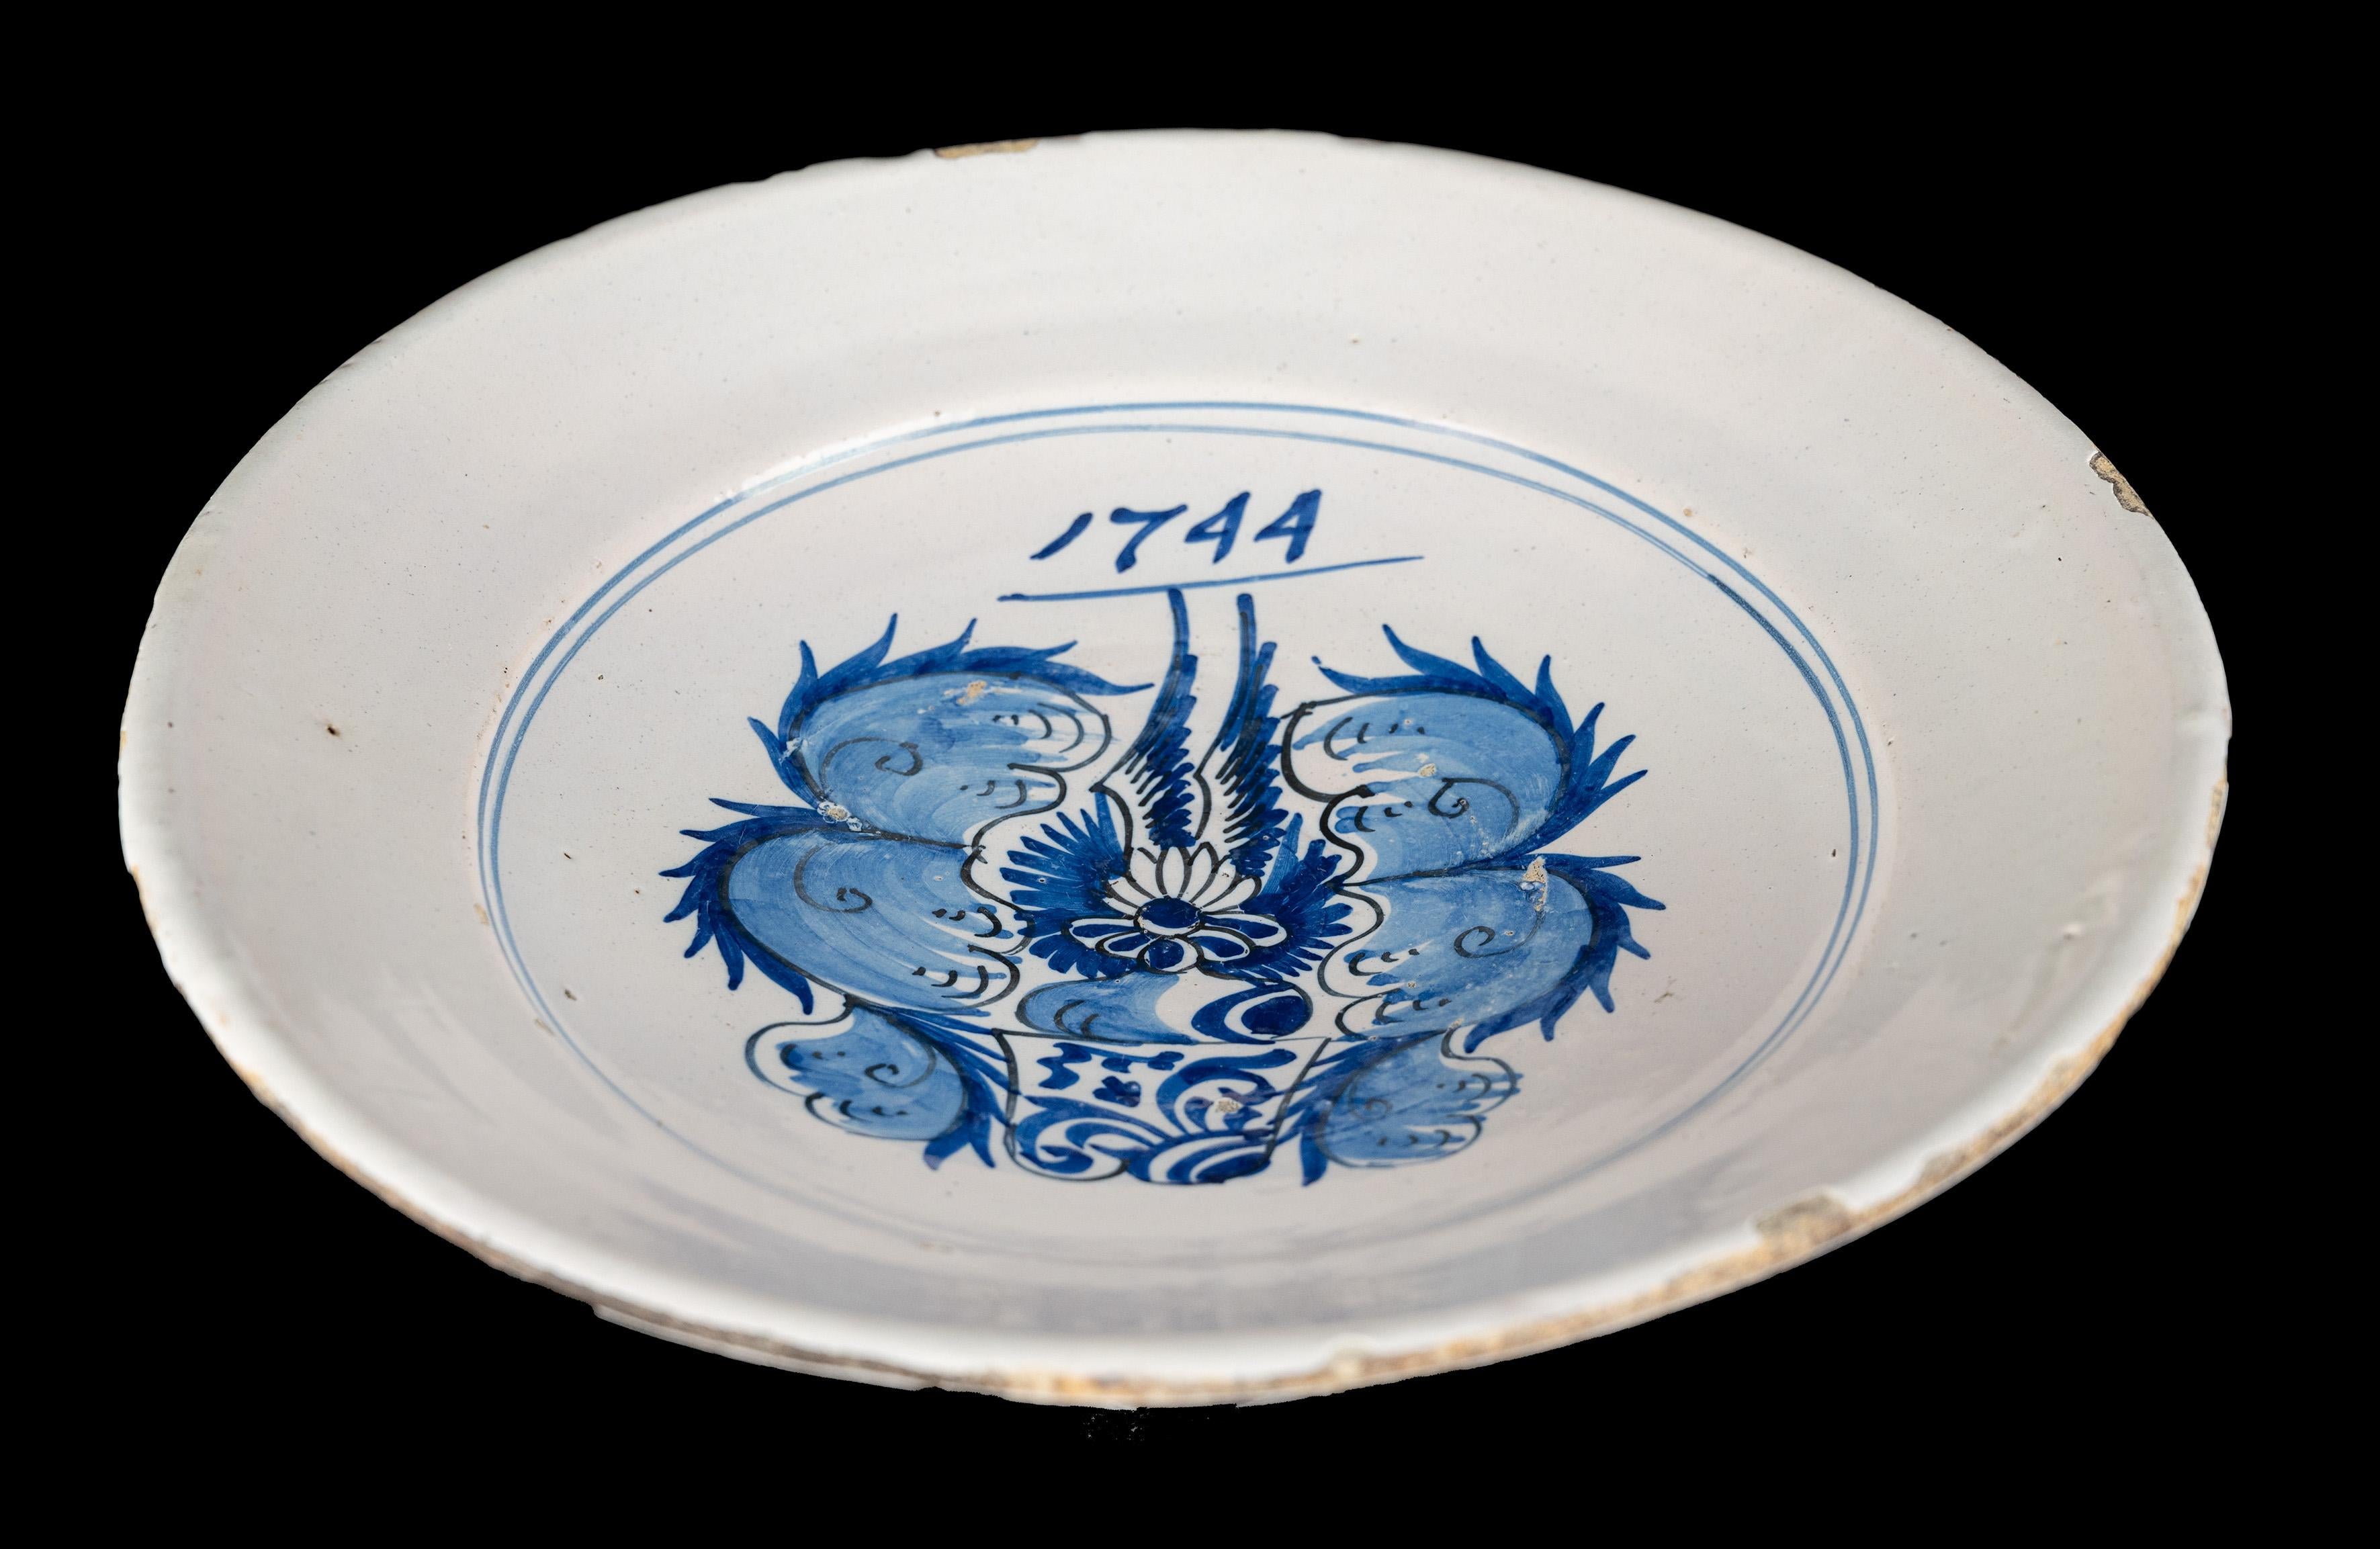 Glazed Delft Blue and White Armorial Majolica Dish, Harlingen, Dated 1744 For Sale